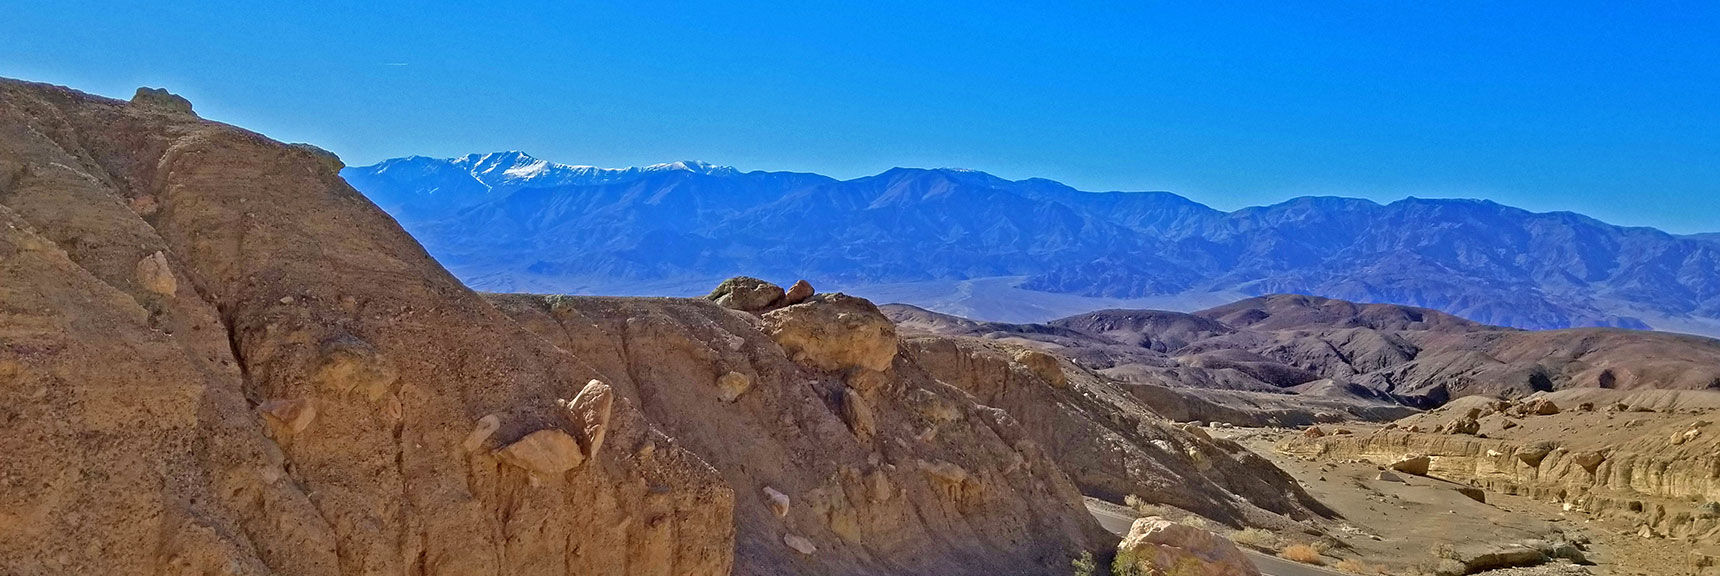 Southwestern View of Panamint Mountain Range from Top of Dry Waterfall Bypass | Artists Drive Hidden Canyon Hikes | Death Valley National Park, California